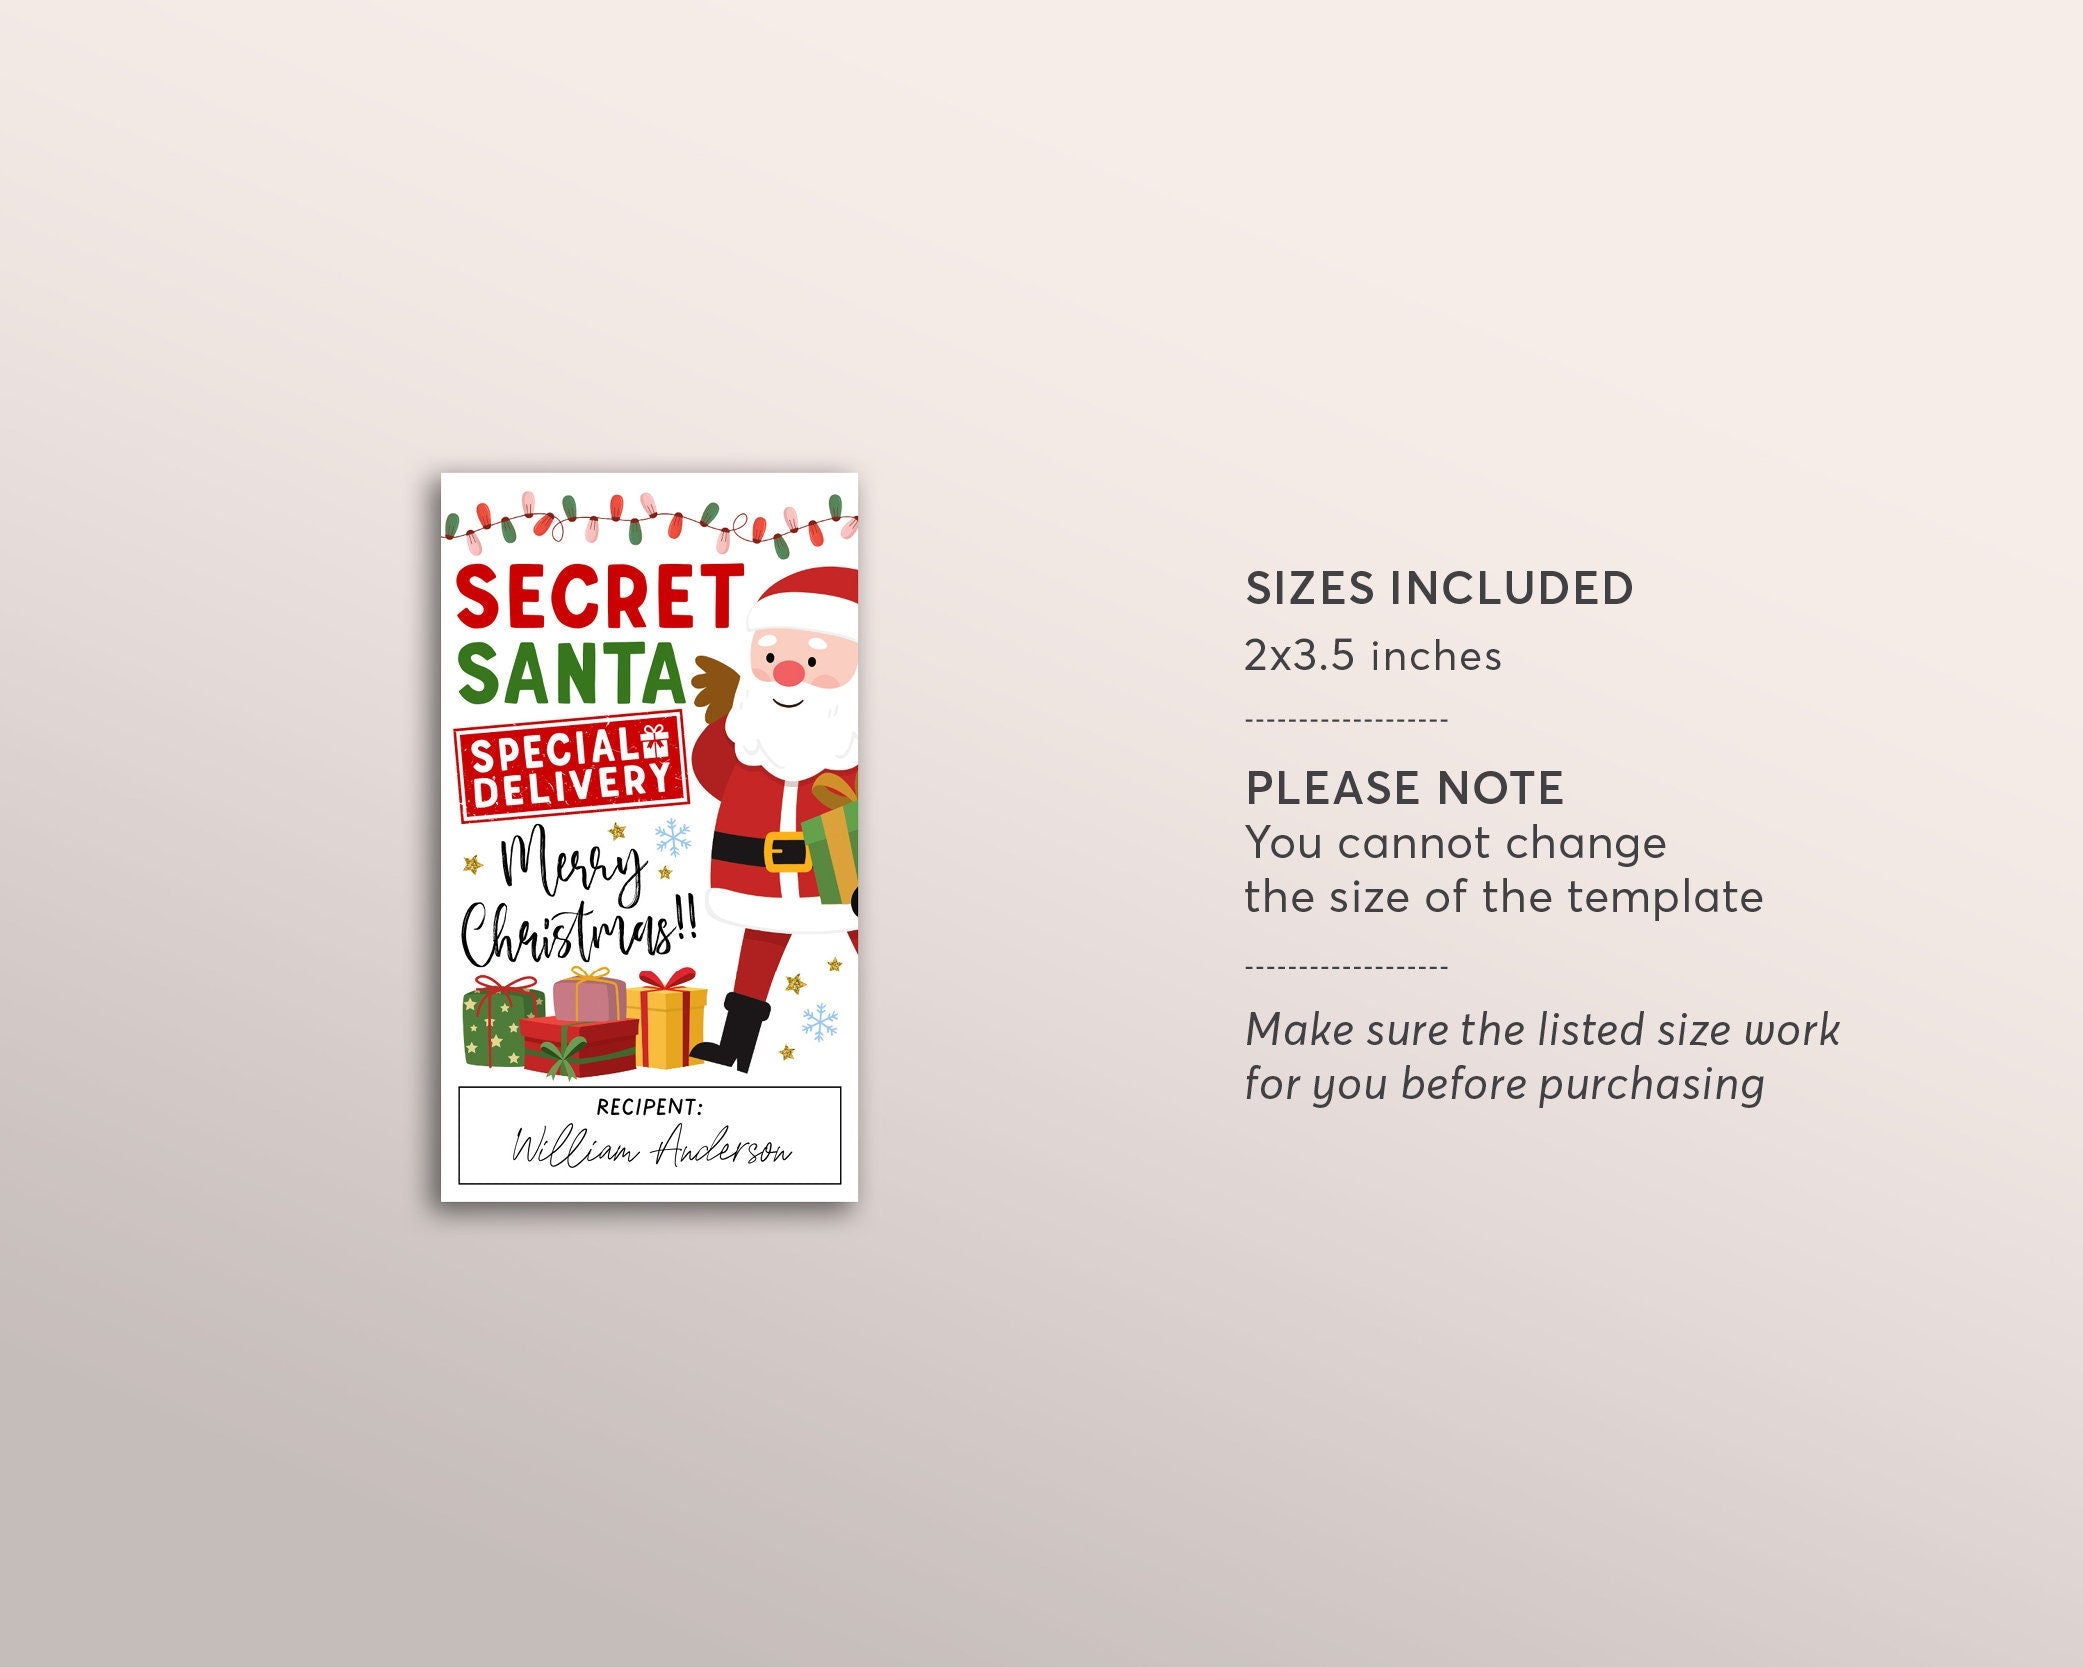 Secret Santa Questionnaire Printable Kit for Adults & Youth